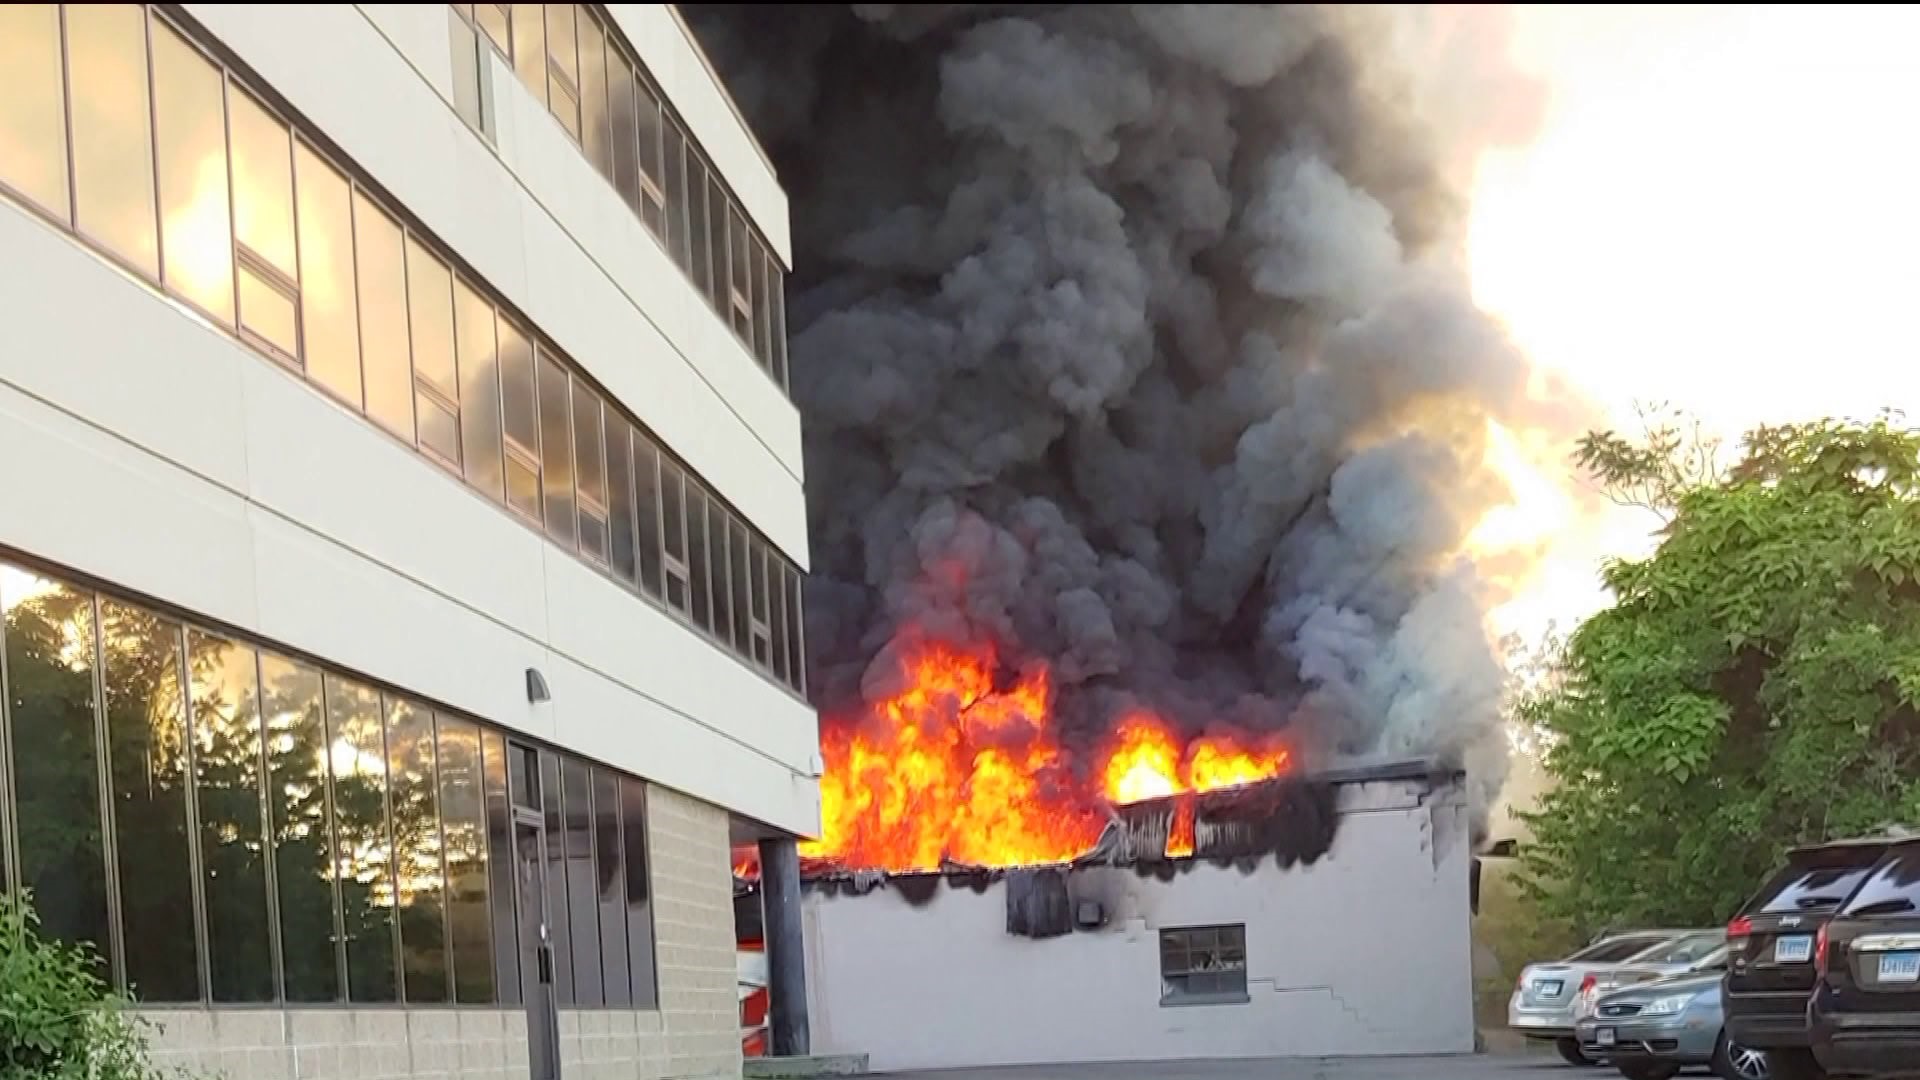 Firefighters battle large fire in Stratford commercial building